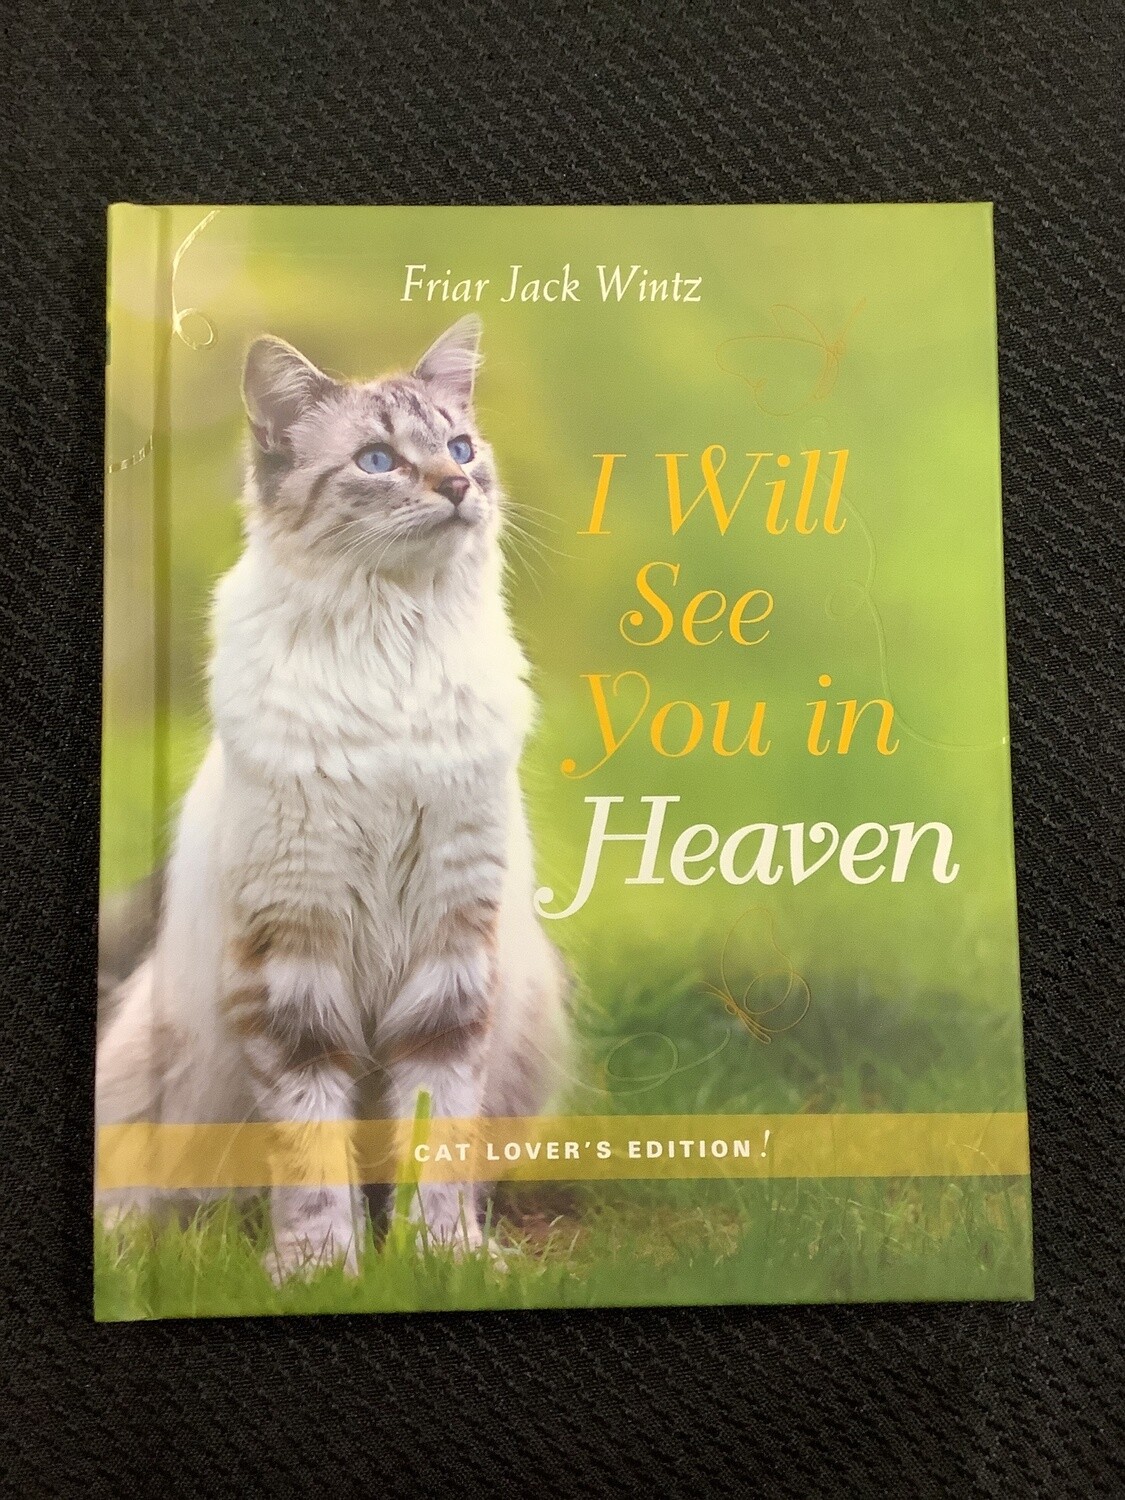 I Will See You In Heaven Cat Lover’s Edition - Friar Jack Wintz